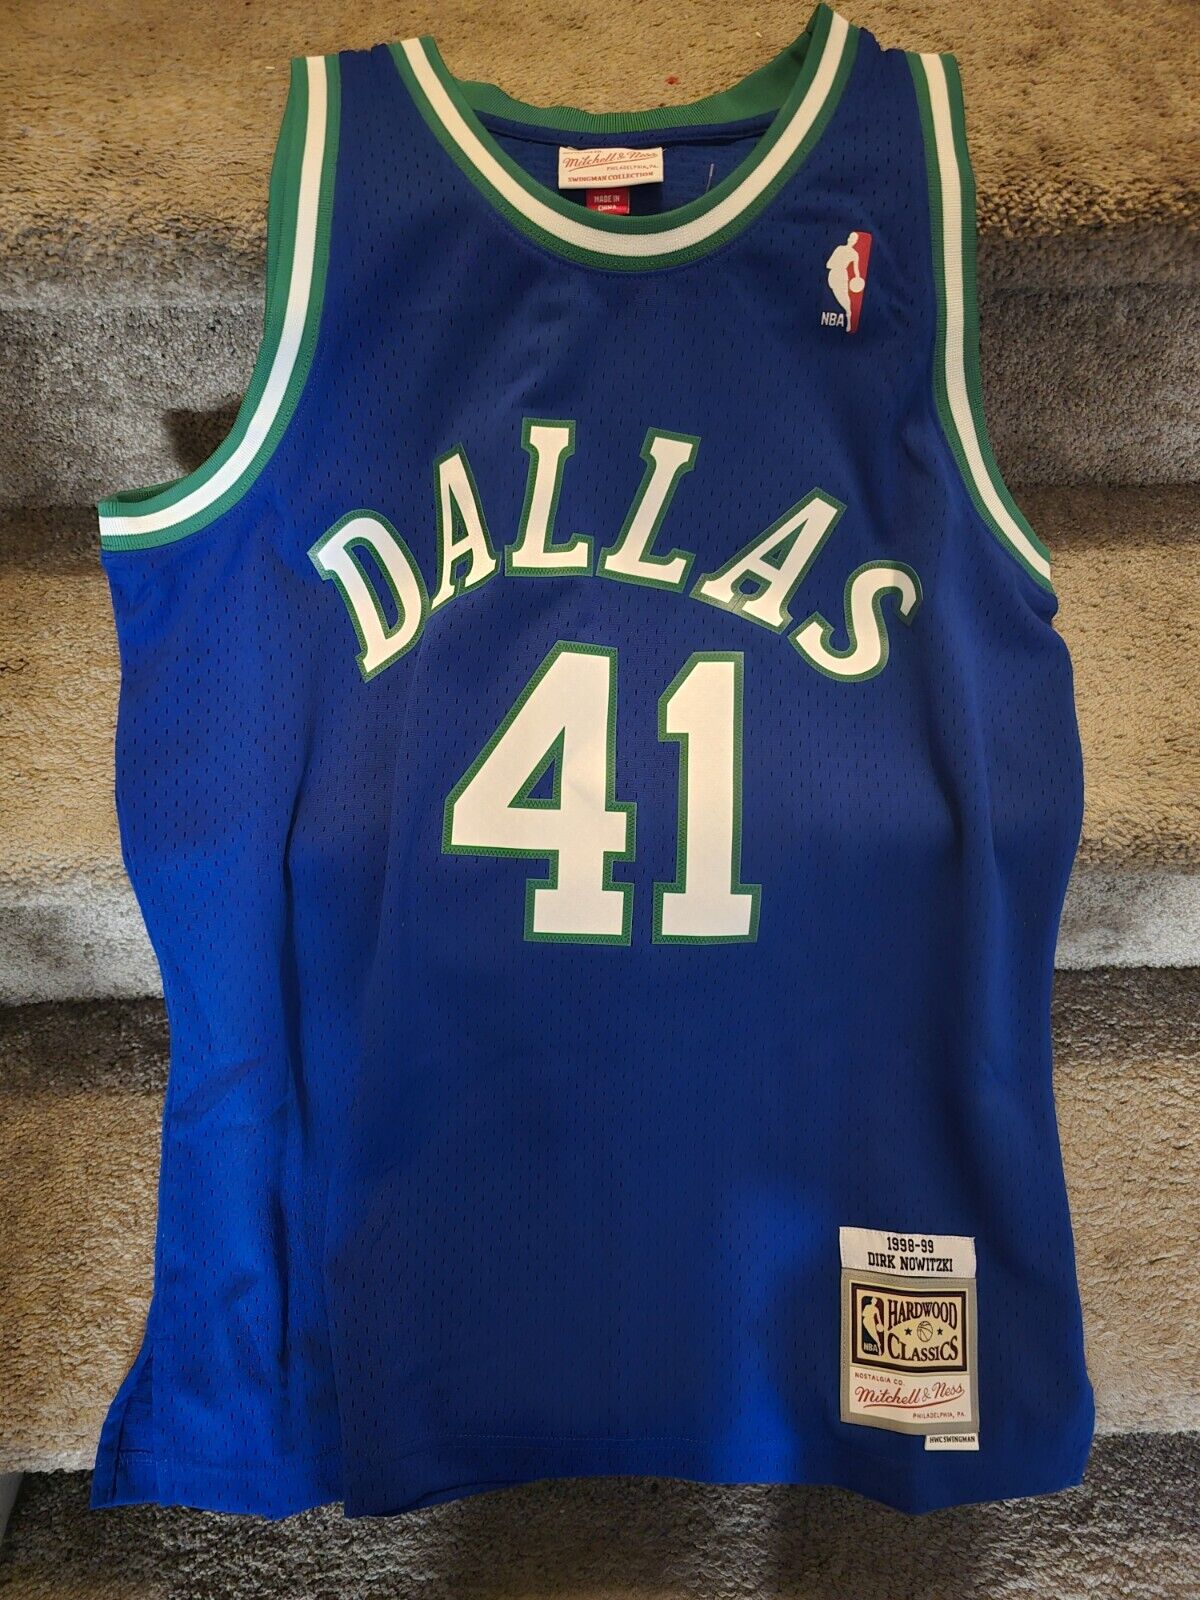 Dirk nowitzki autographed authentic Mitchell and ness jersey